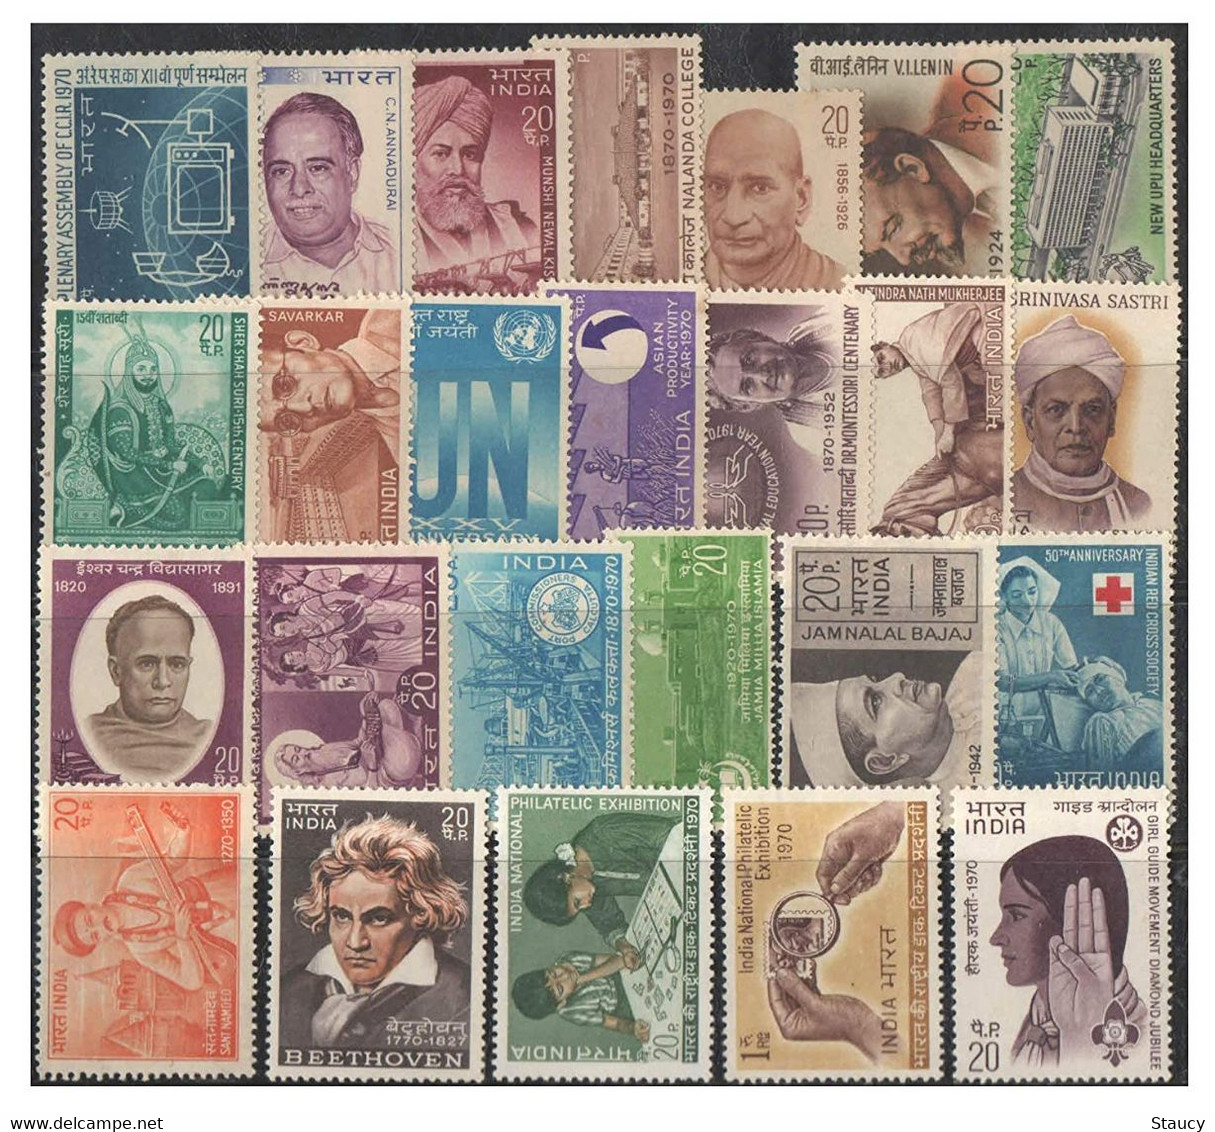 India 1970 Complete Year Pack / Set / Collection Total 25 Stamps (No Missing) MNH As Per Scan - Komplette Jahrgänge